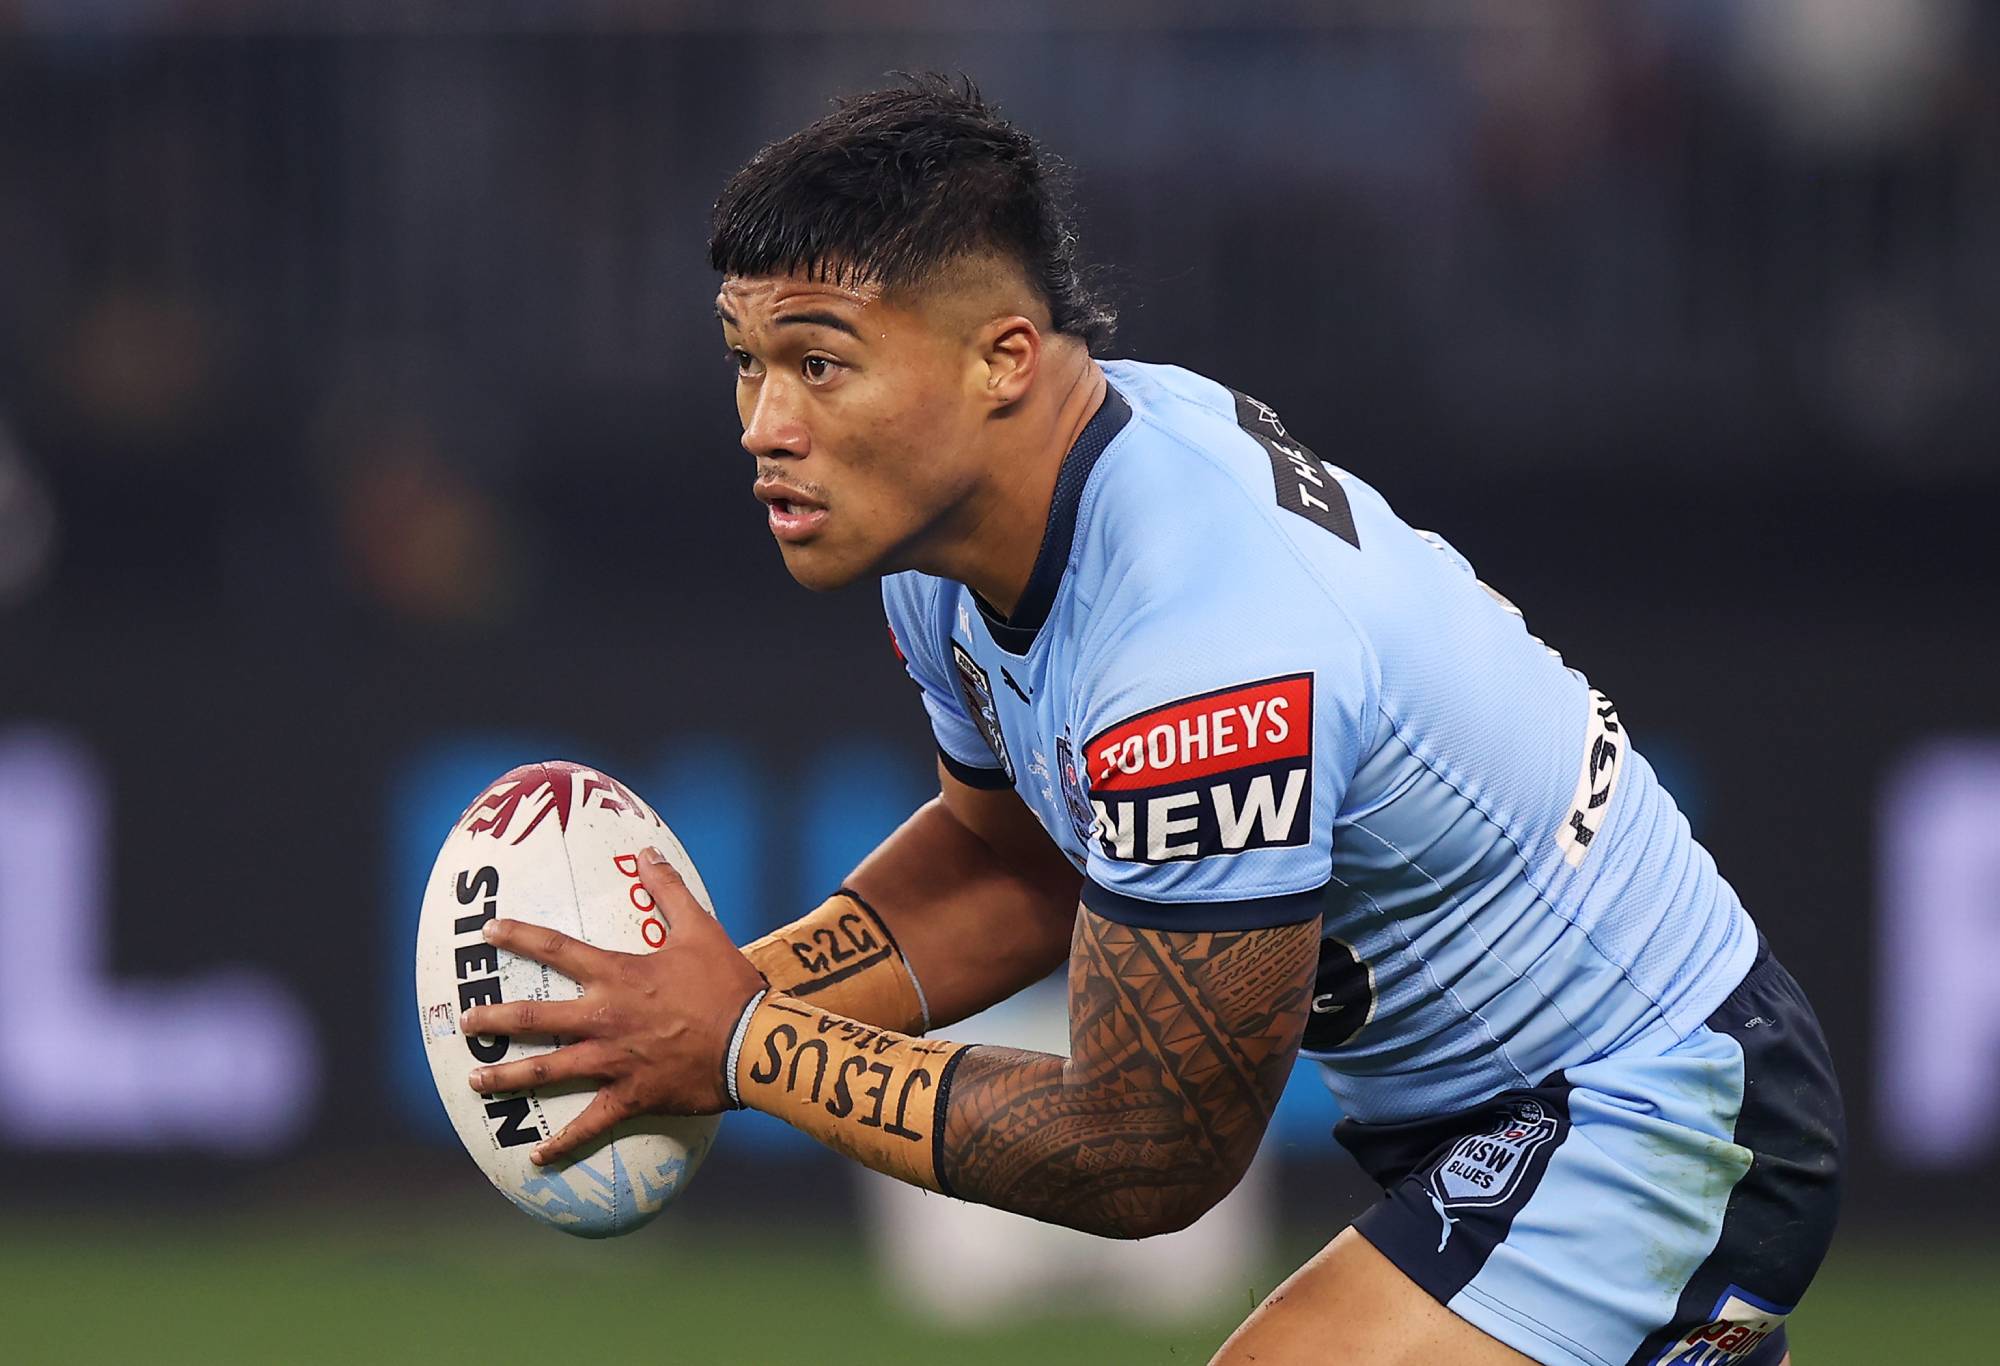 Brian To'o runs the ball for NSW